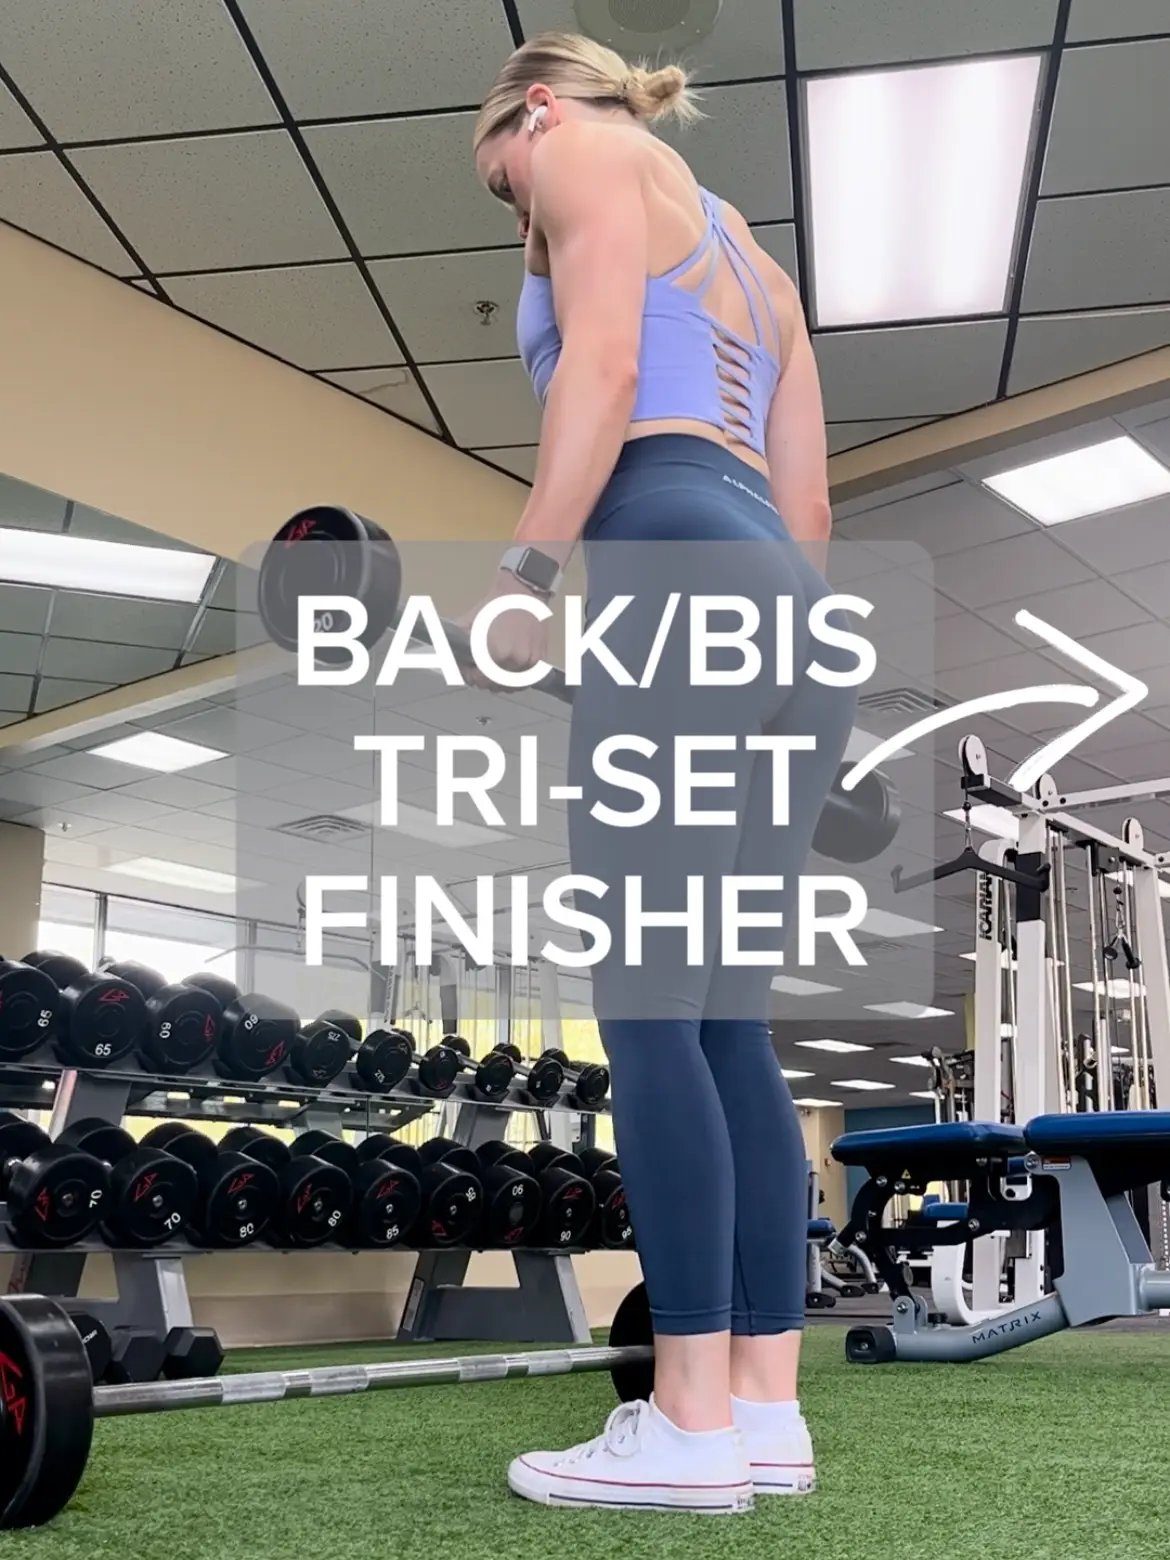 Back/bis tri-set finisher, Gallery posted by maryannzmuda